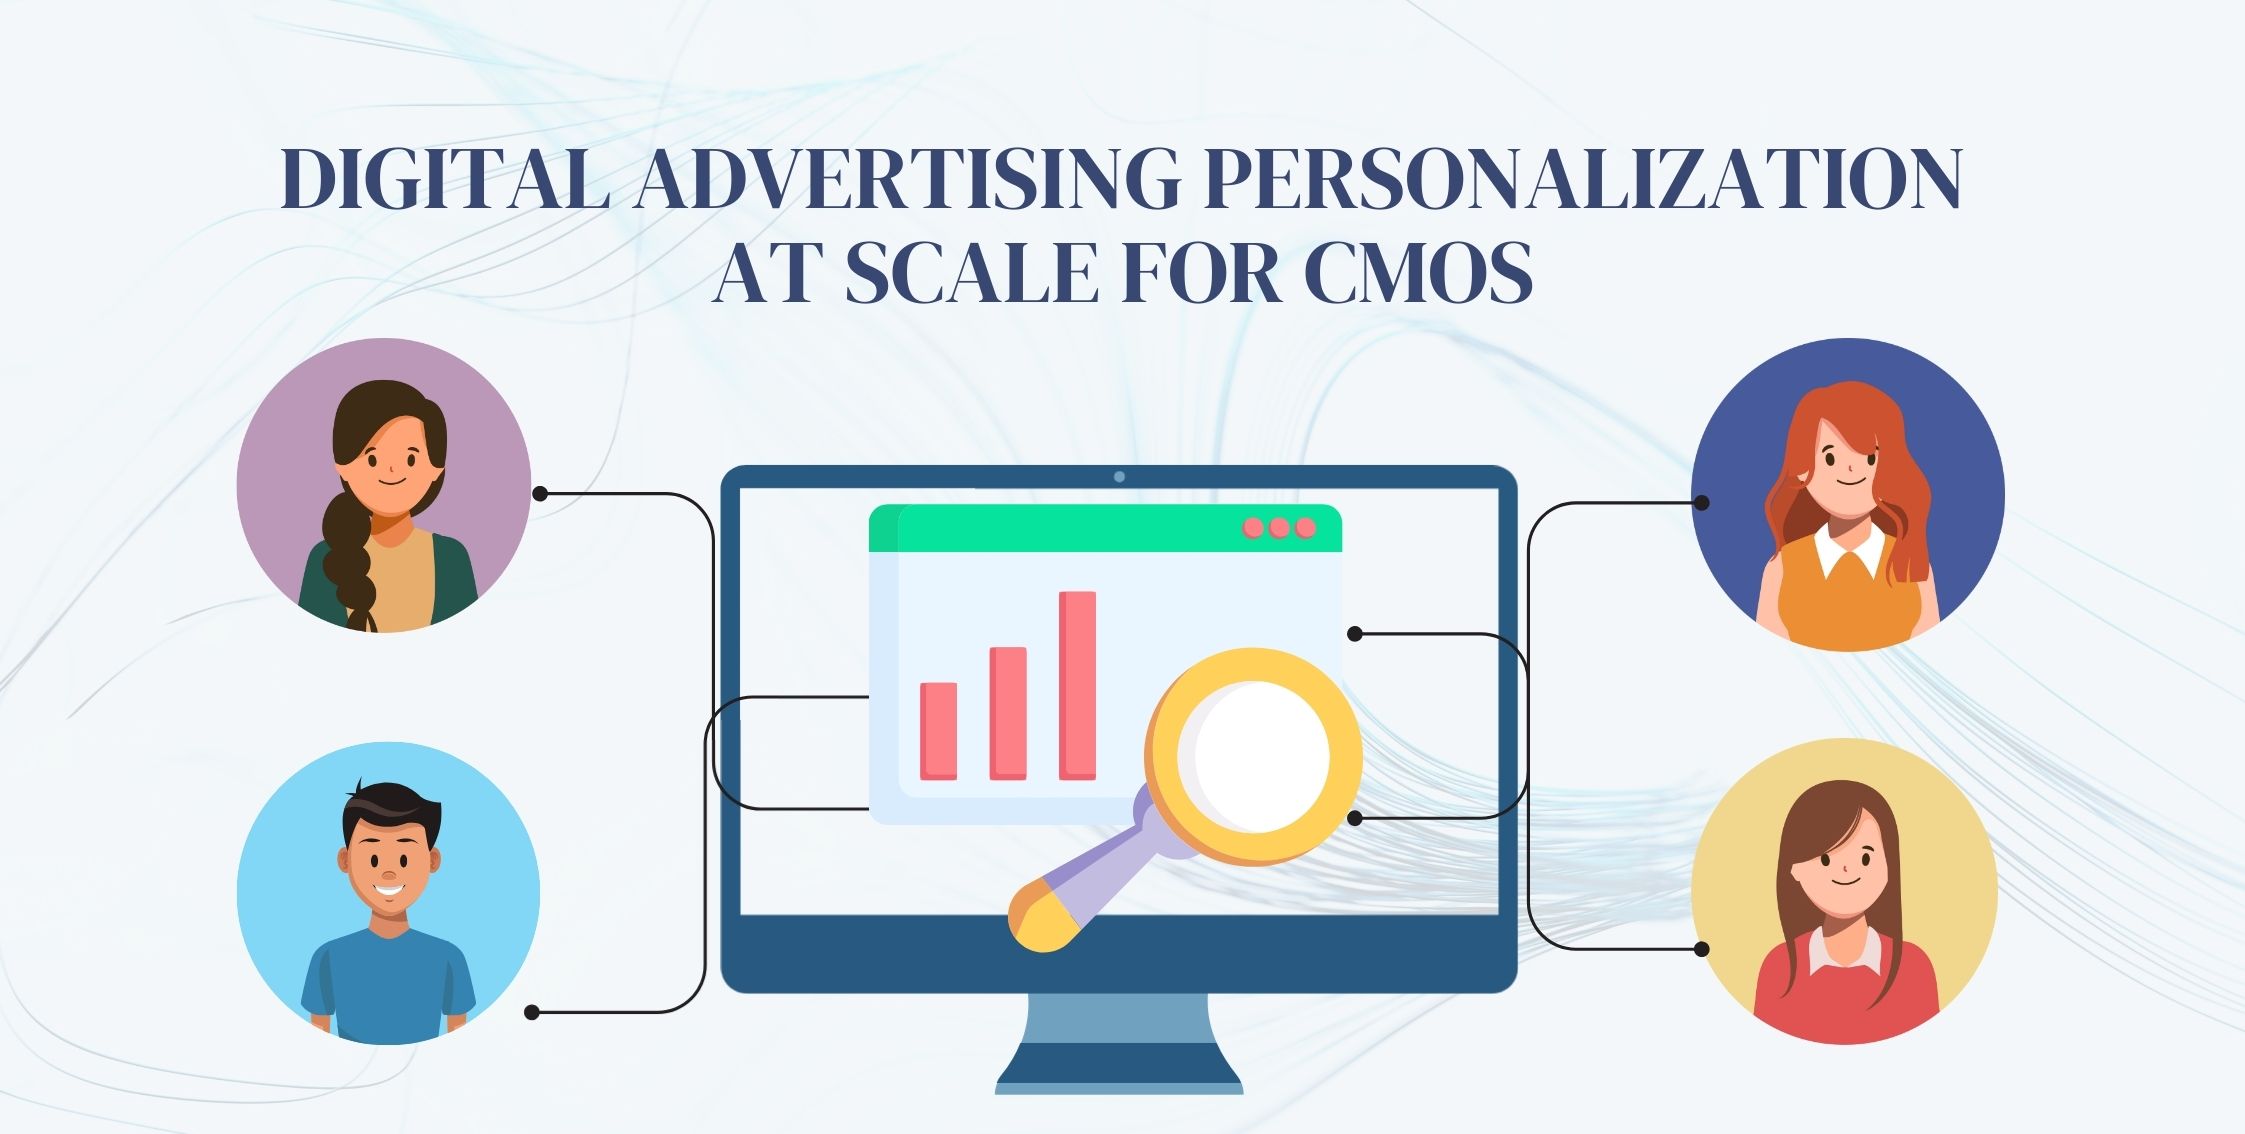 Digital Advertising Personalization at Scale for CMOs